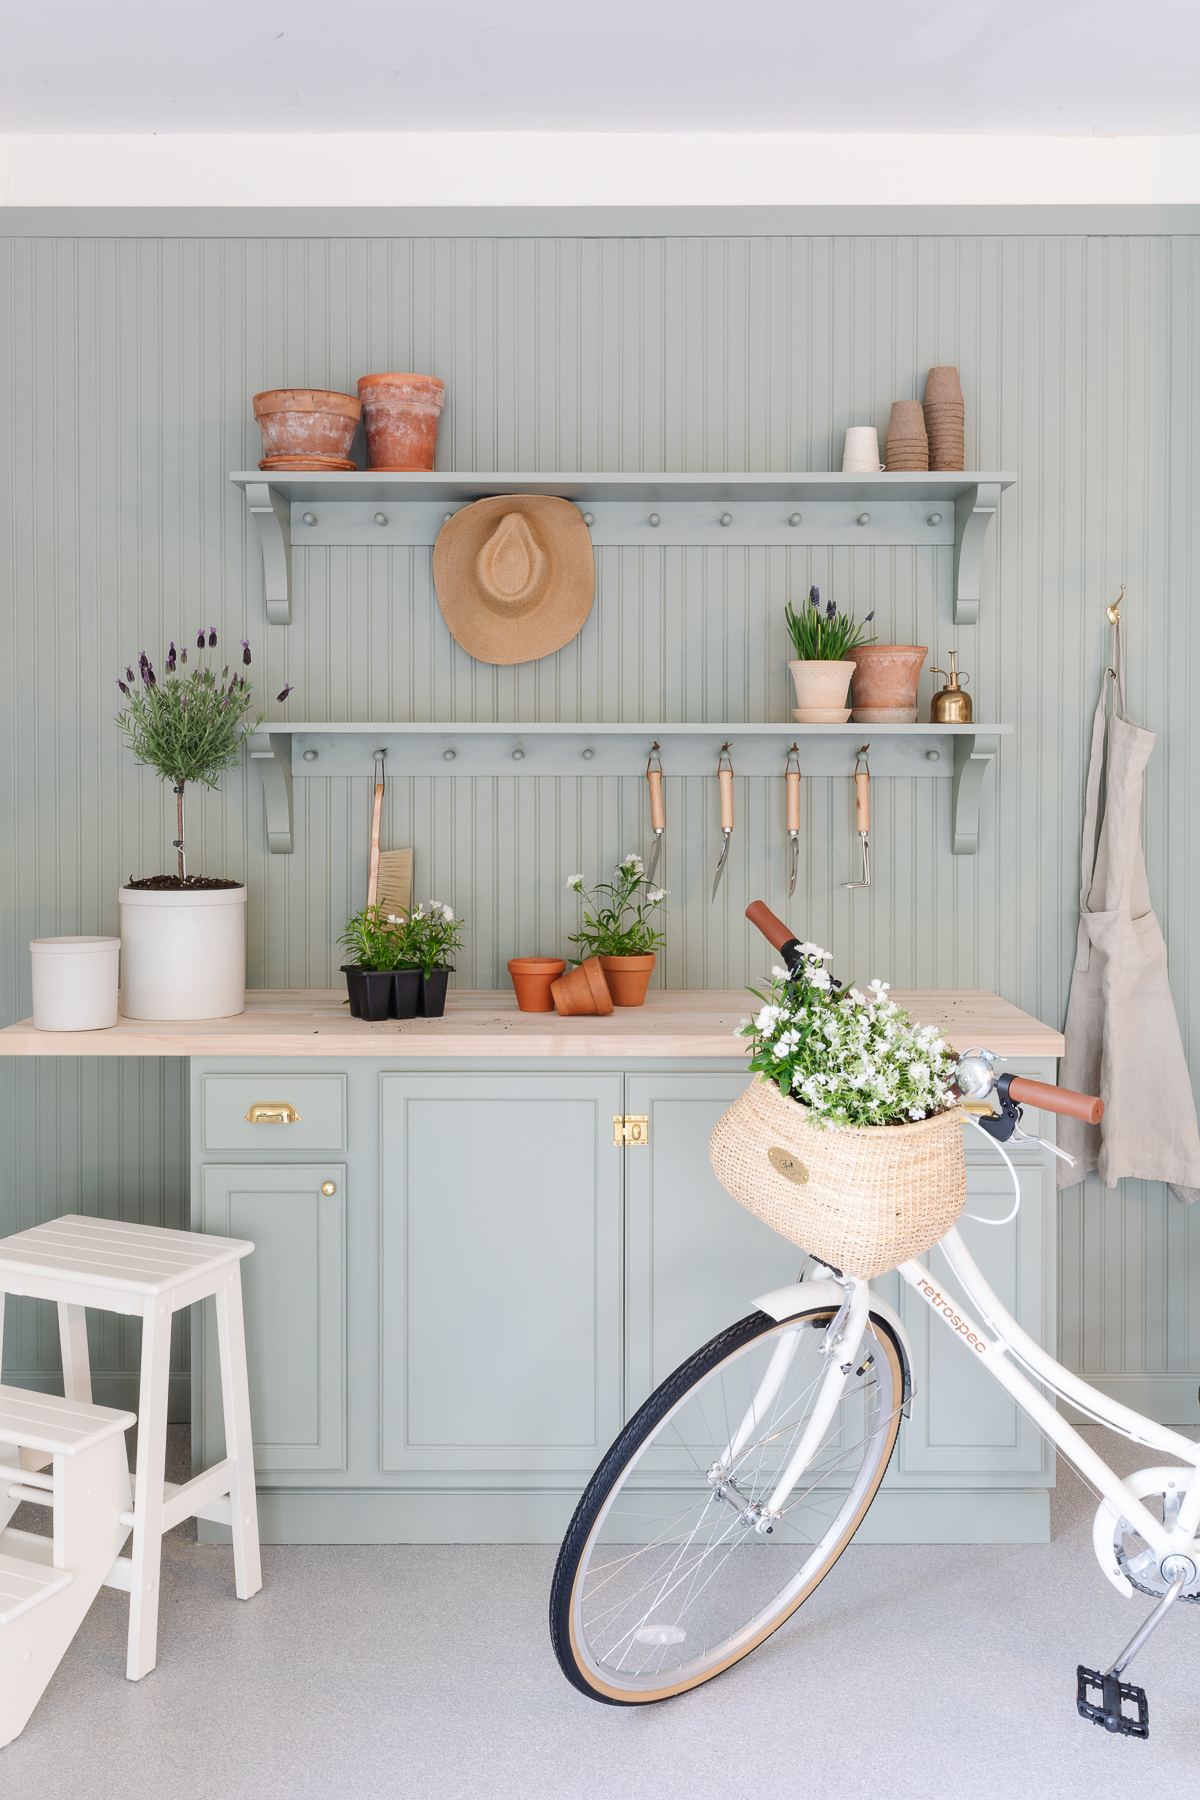 A garden bench and shelf with peg board, painted in sage green paint color.